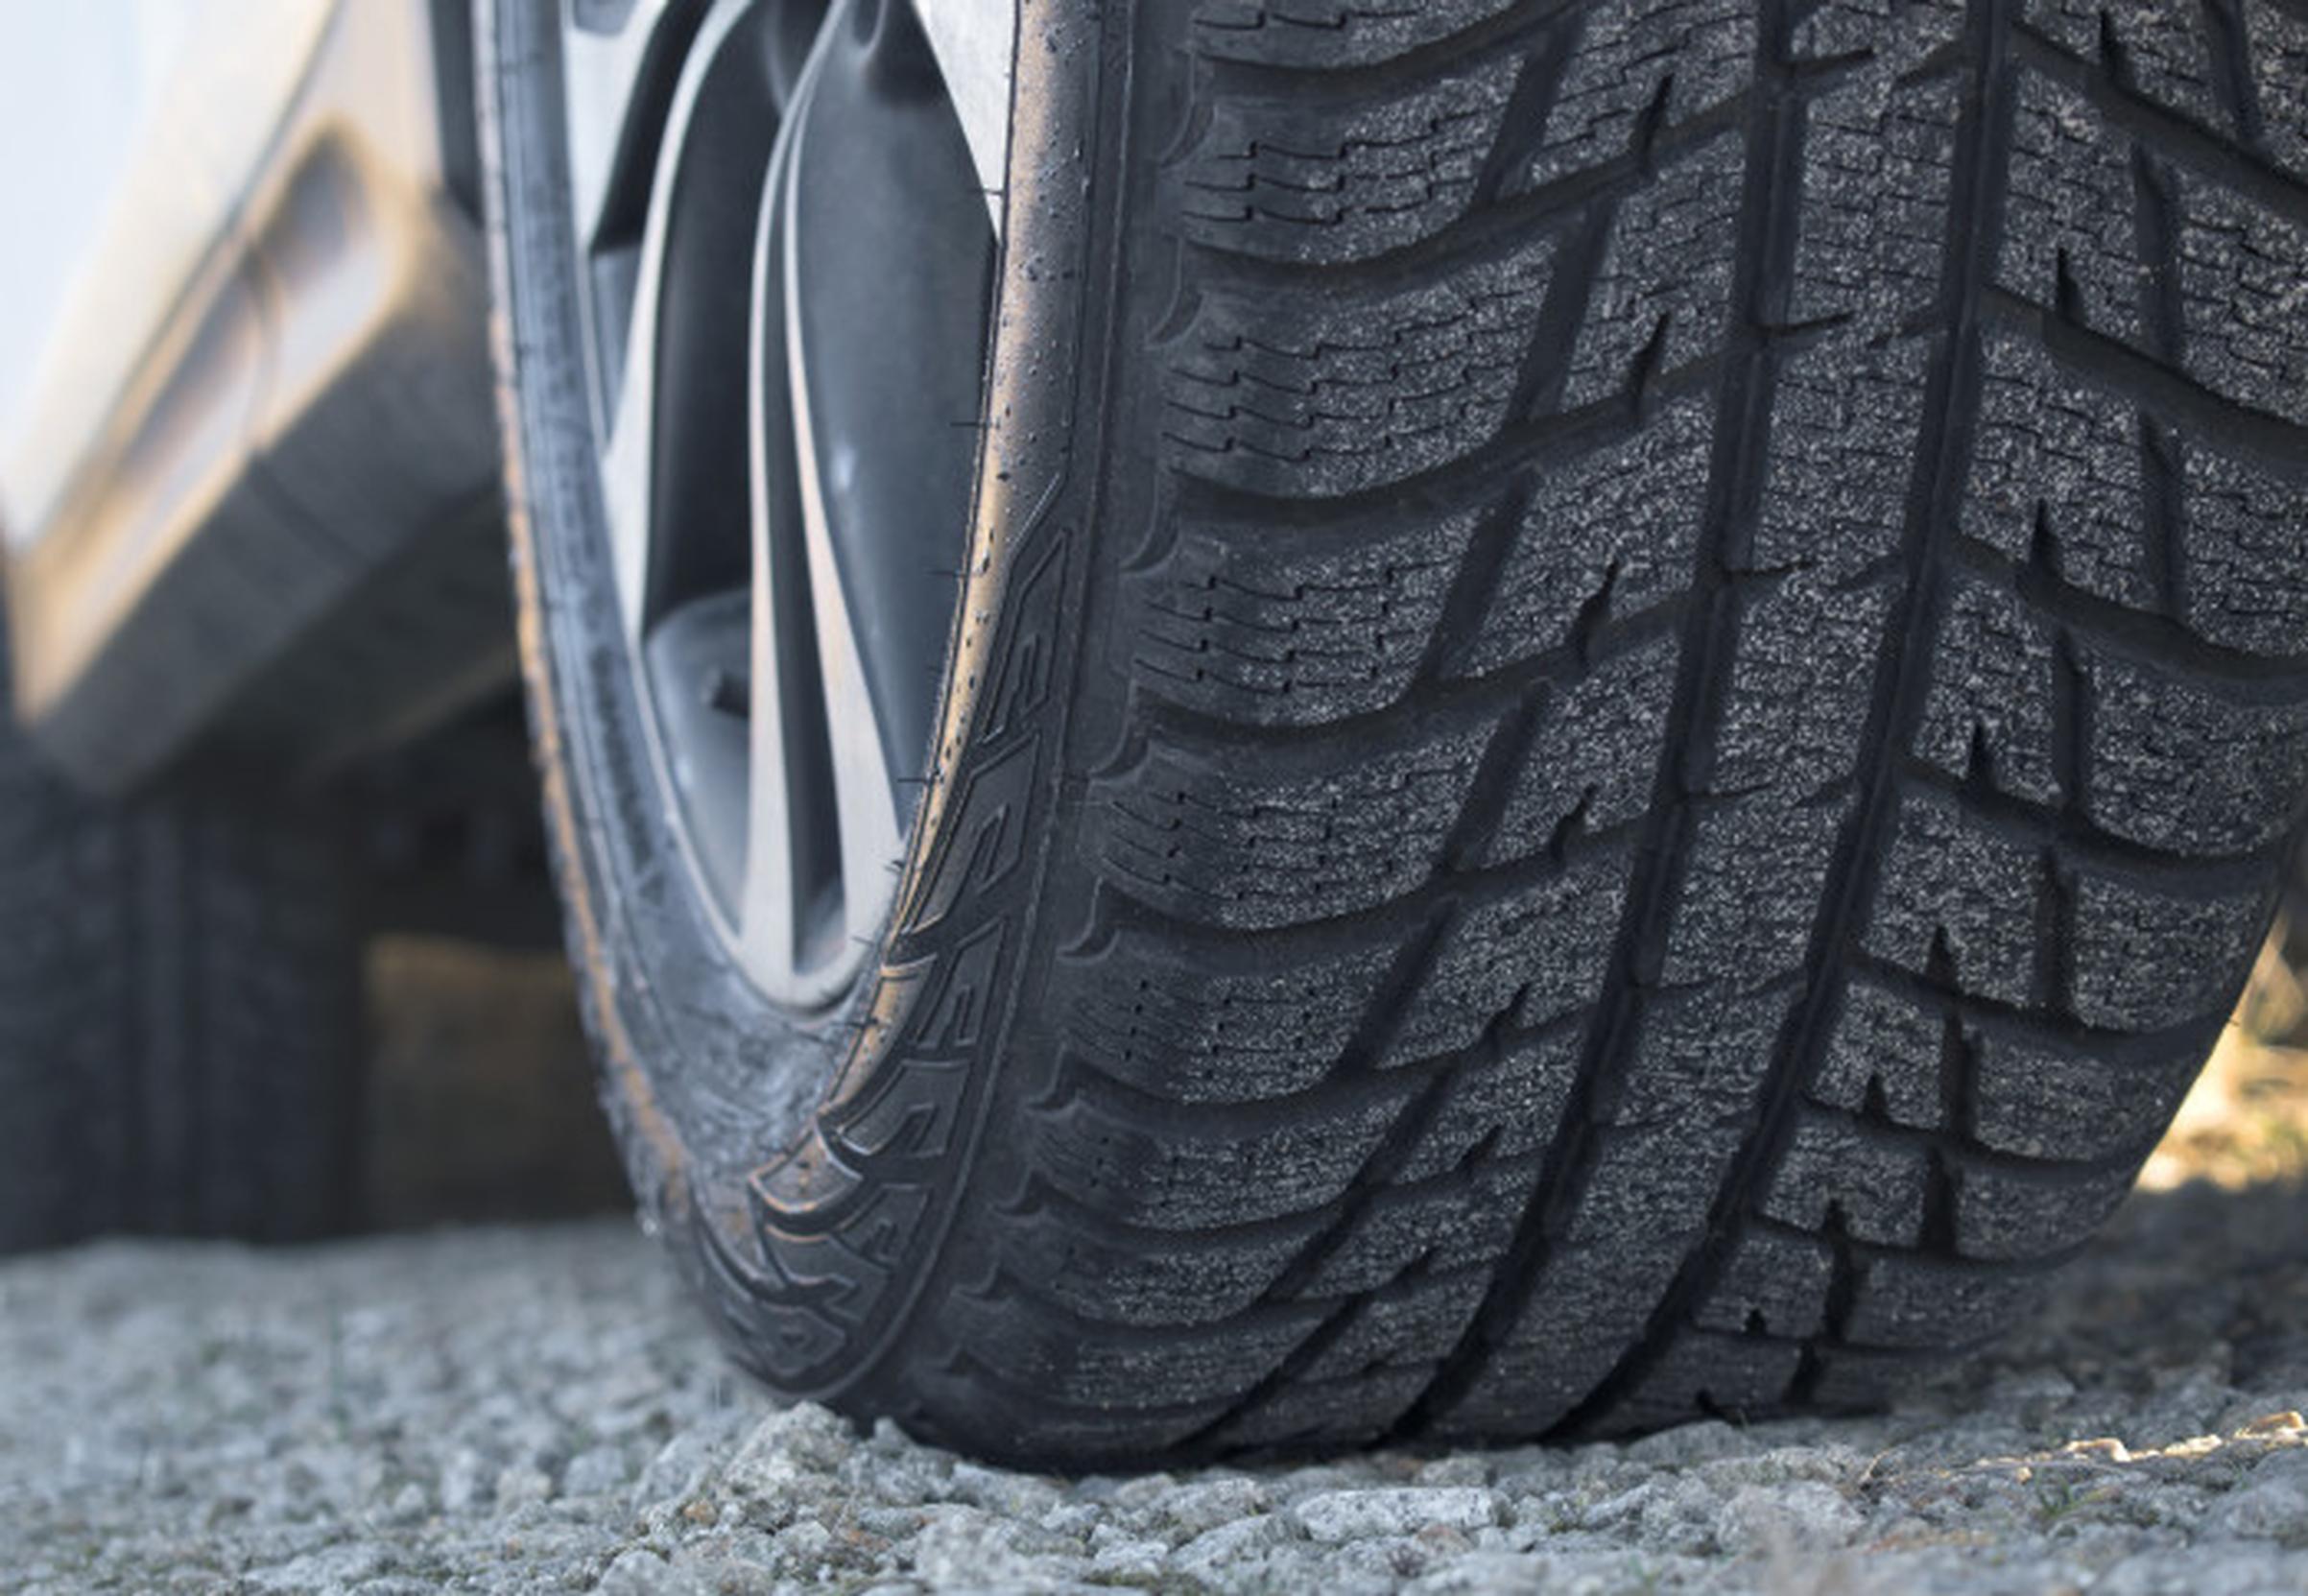 Six million tonnes of tyre wear particles are released globally each year